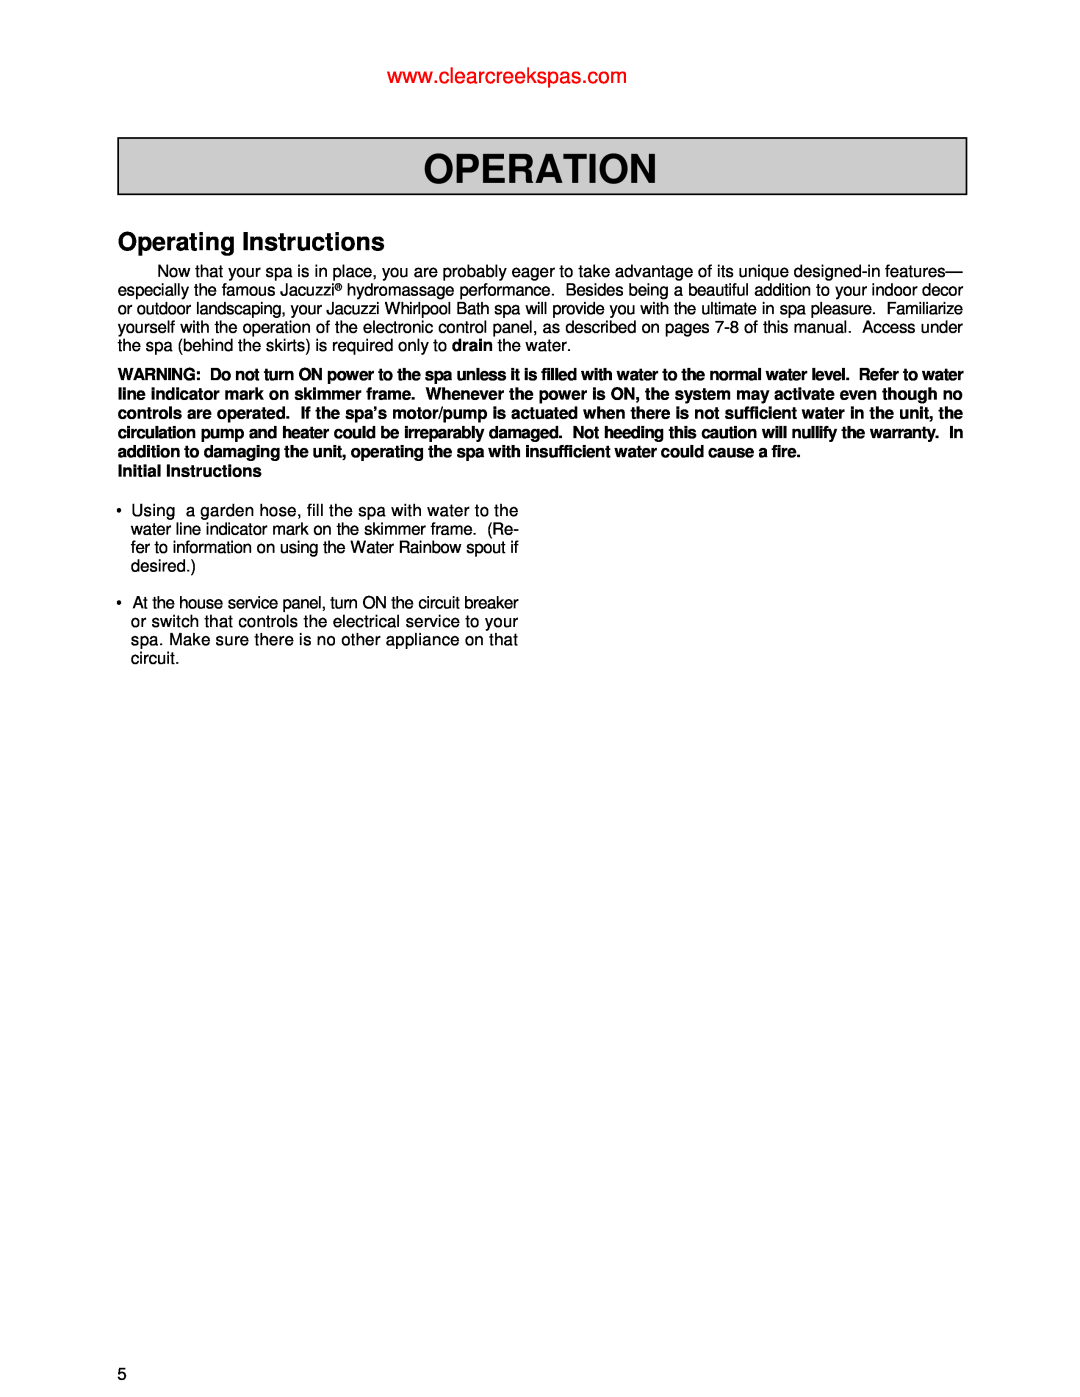 Jacuzzi Whirlpool Spa owner manual Operation, Operating Instructions, Initial Instructions 